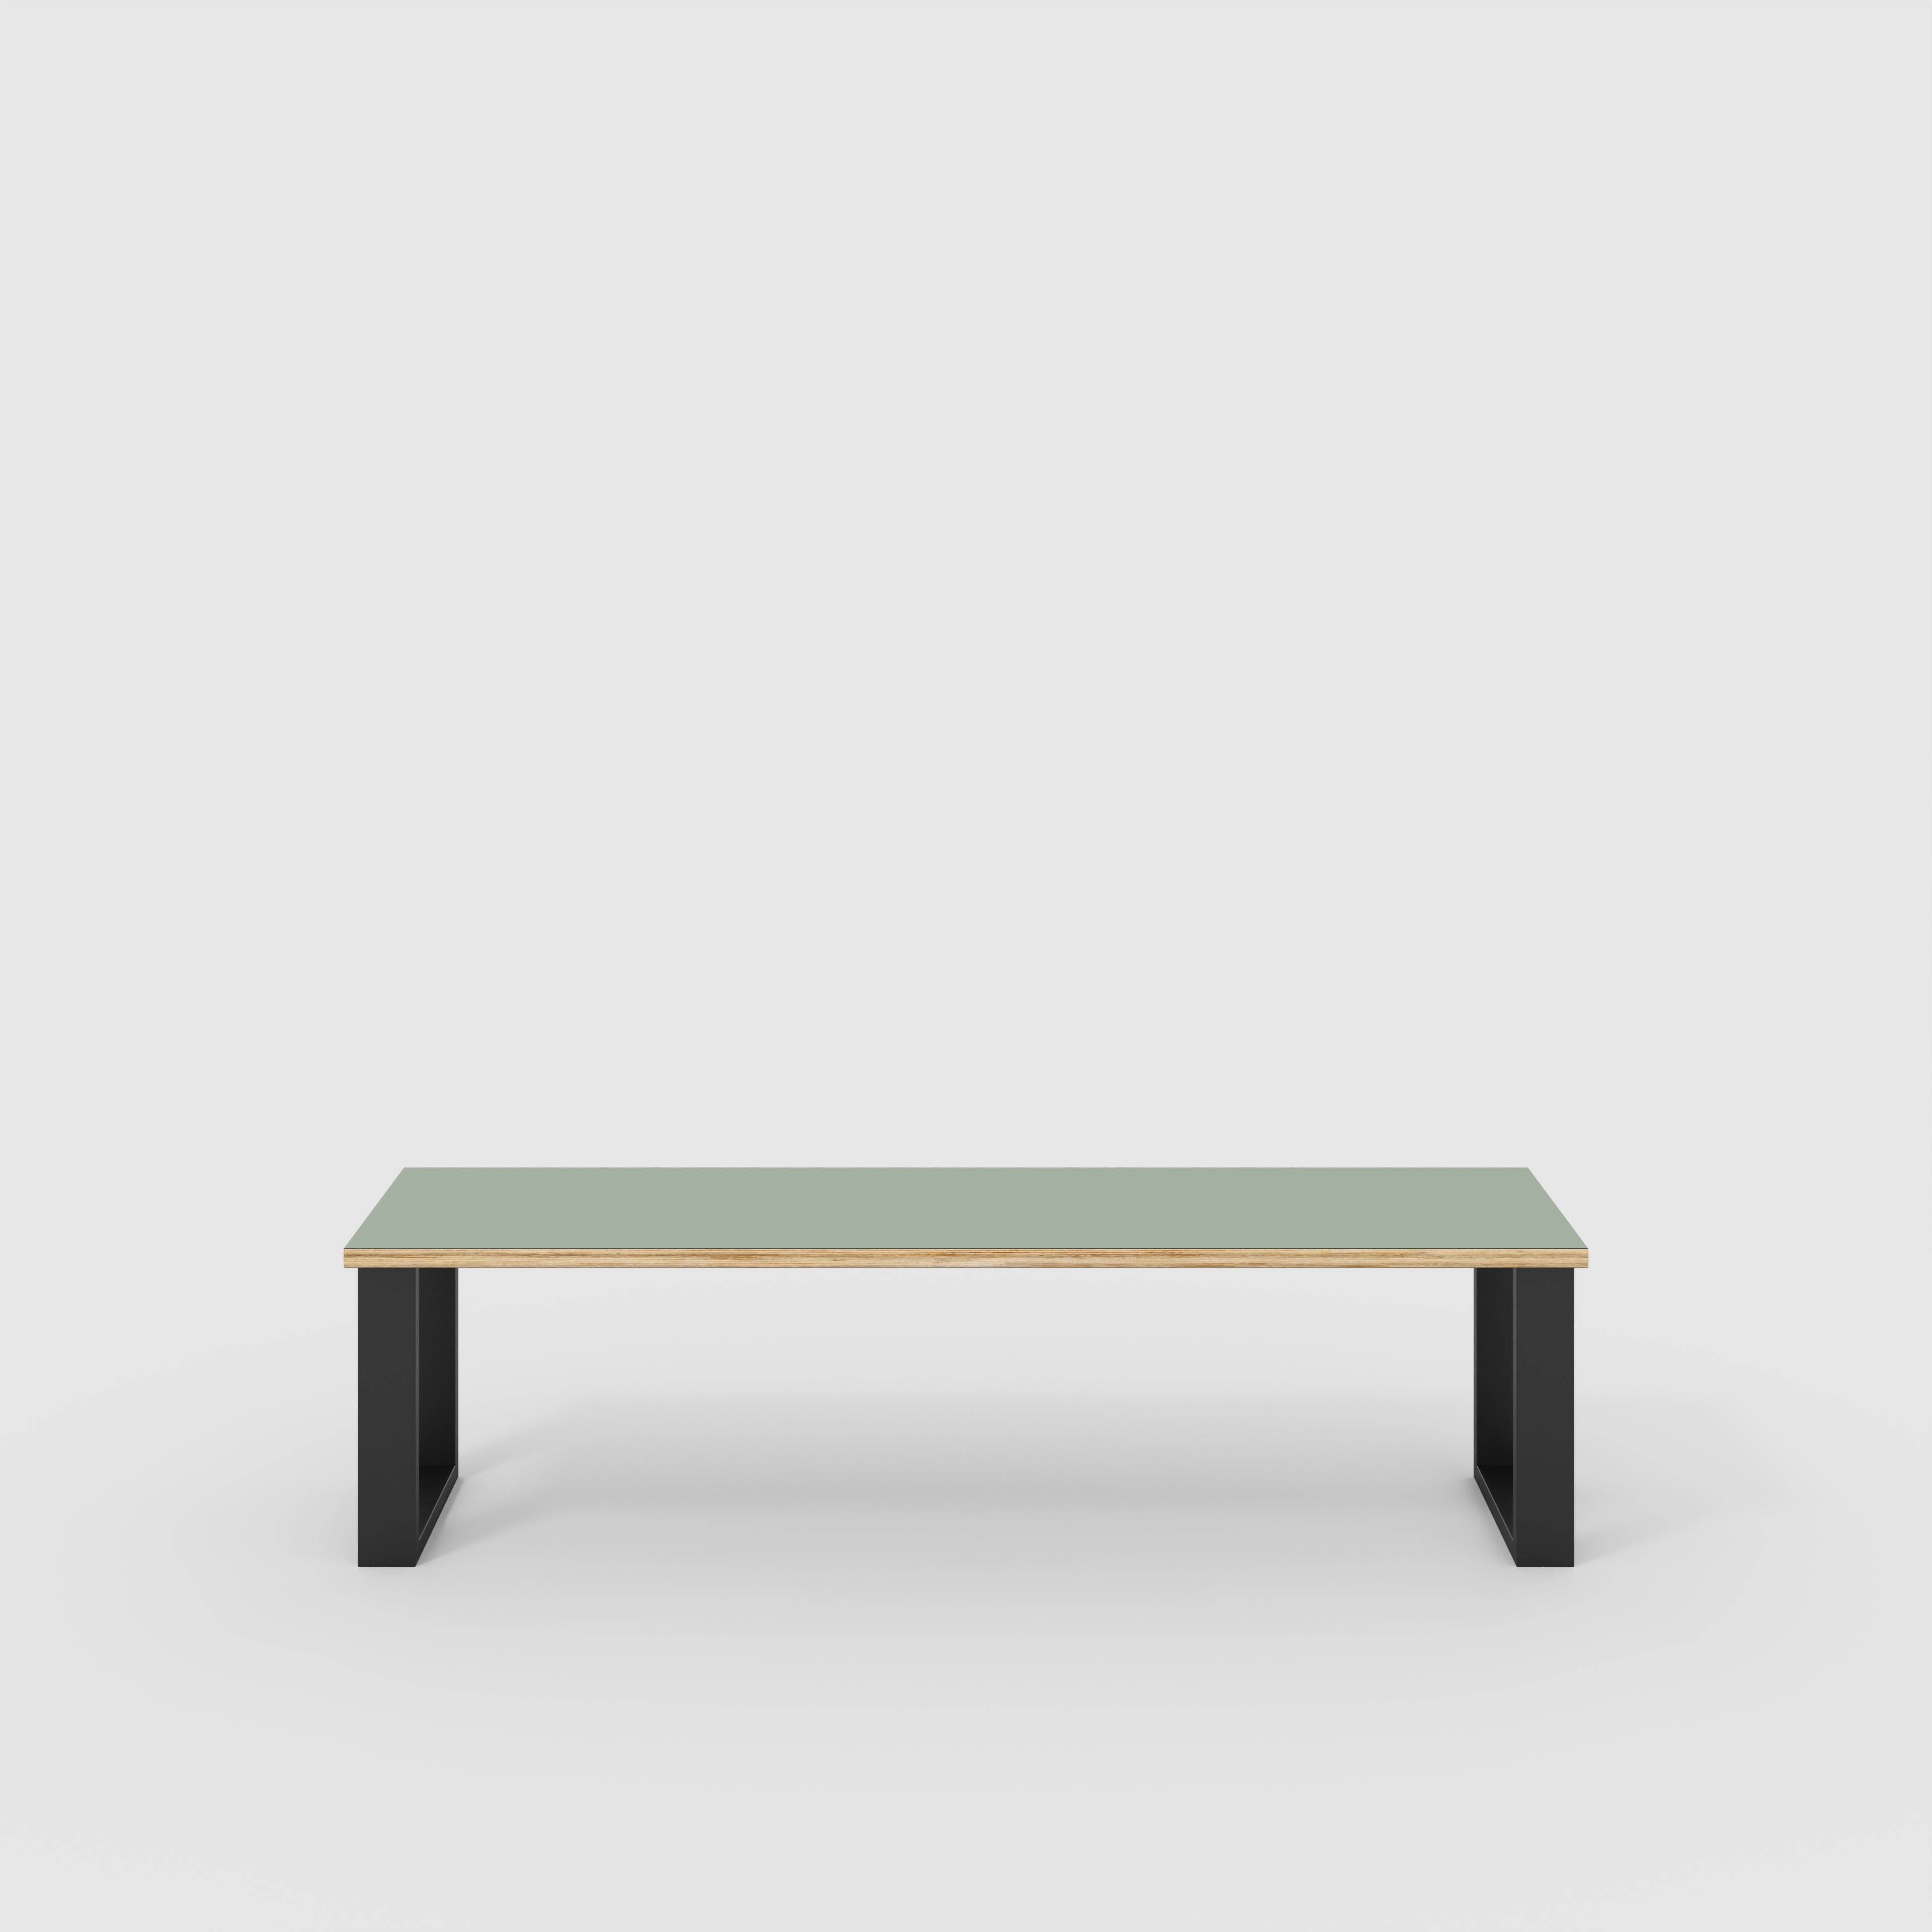 Bench Seat with Black Industrial Legs - Formica Green Slate - 1600(w) x 400(d)